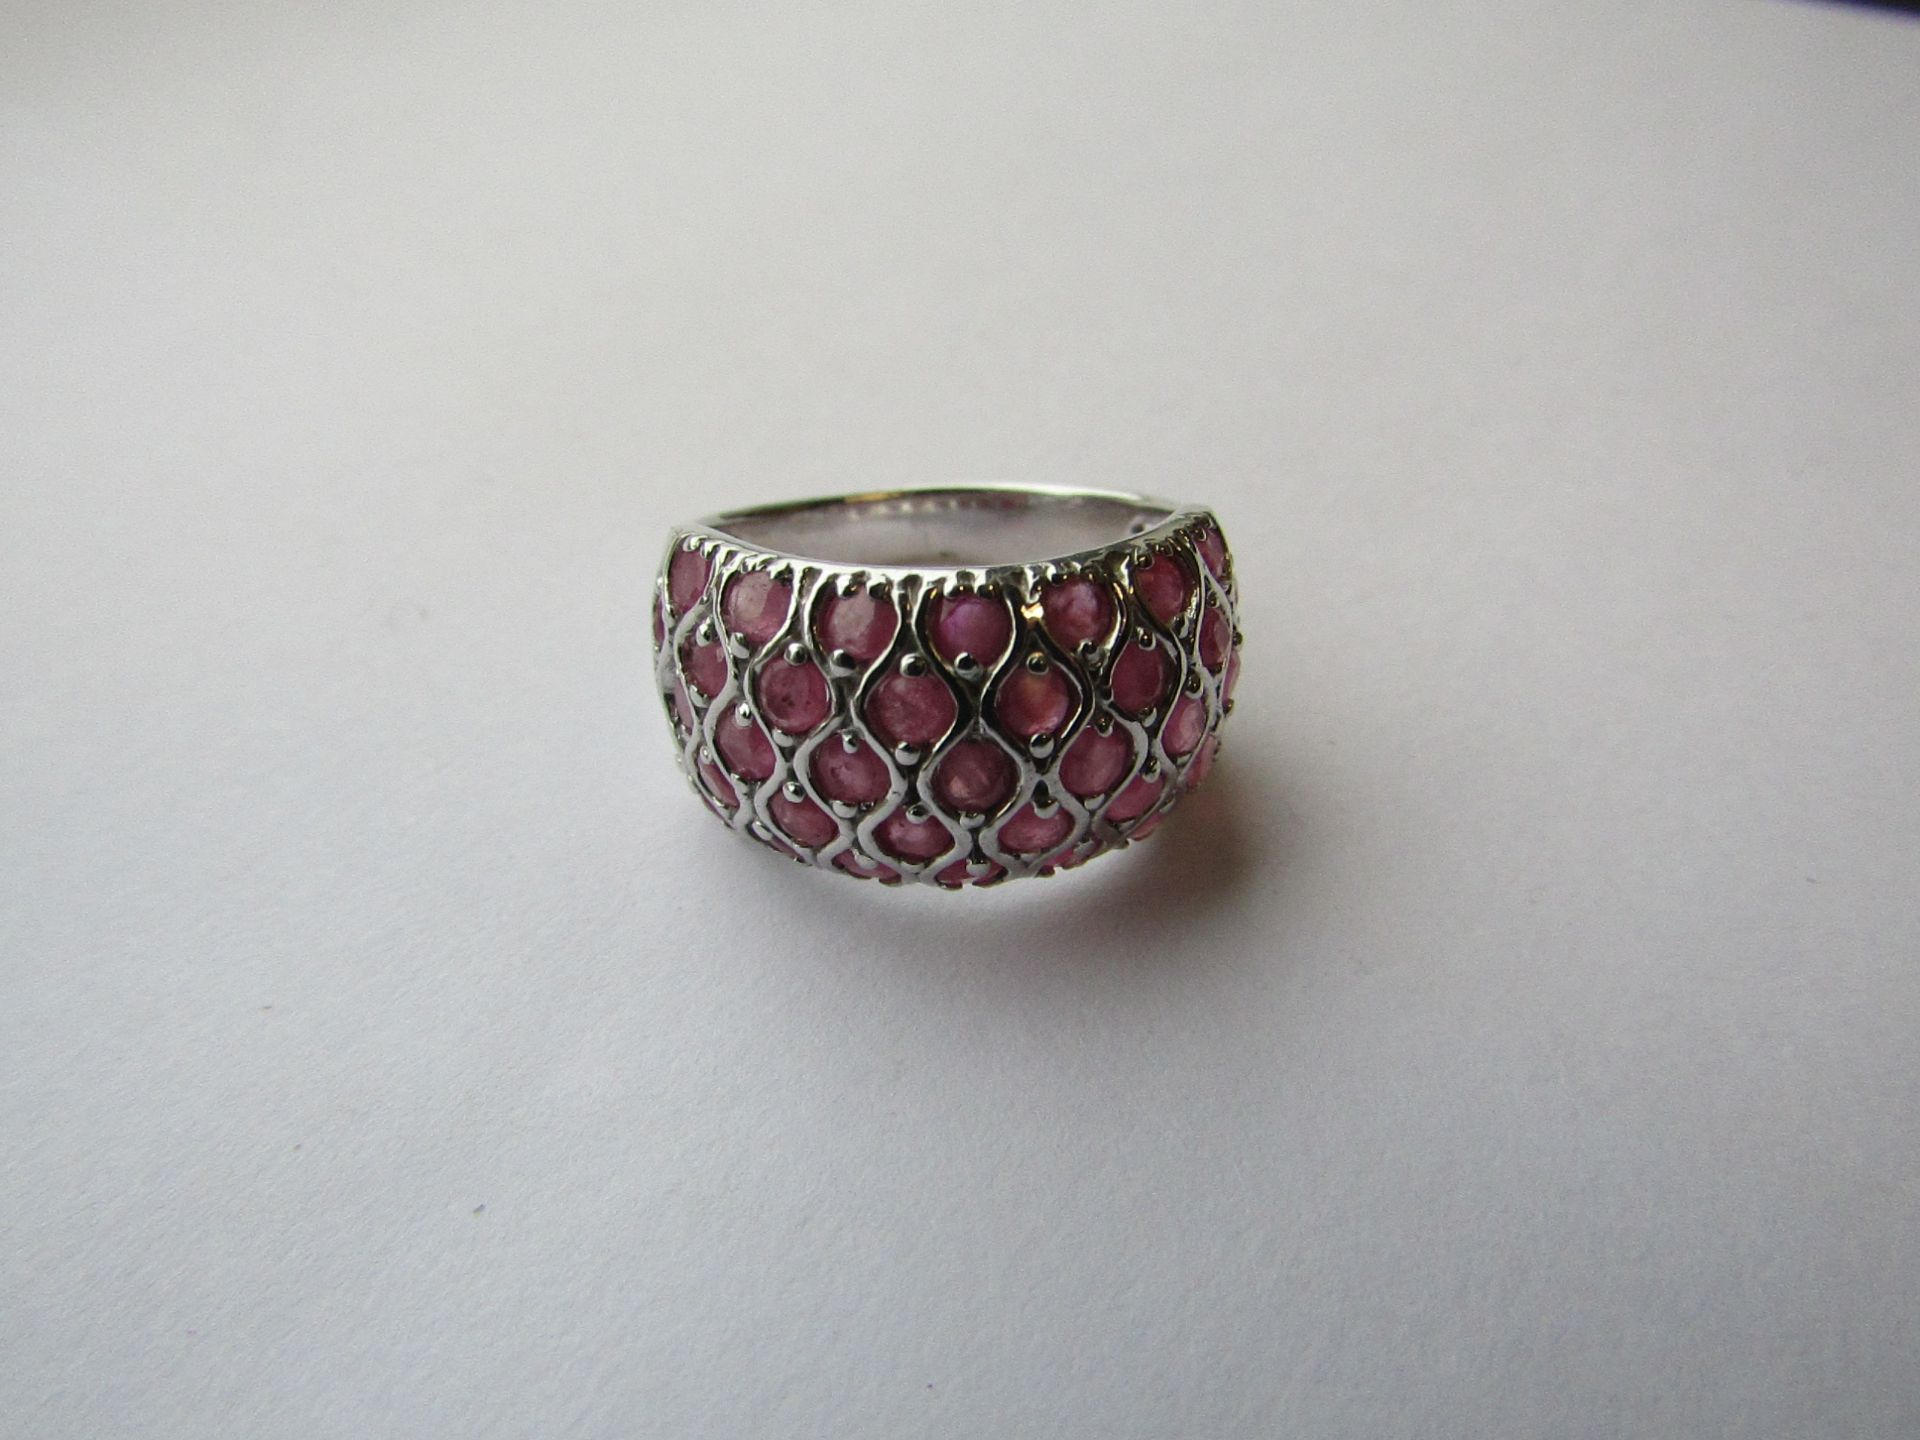 ELEGANT ROUND NATURAL RICH RED PINK RUBY RING, SET WITH 35 NATURAL RUBIES. RRP £1500 STERLING SILVER - Image 3 of 3